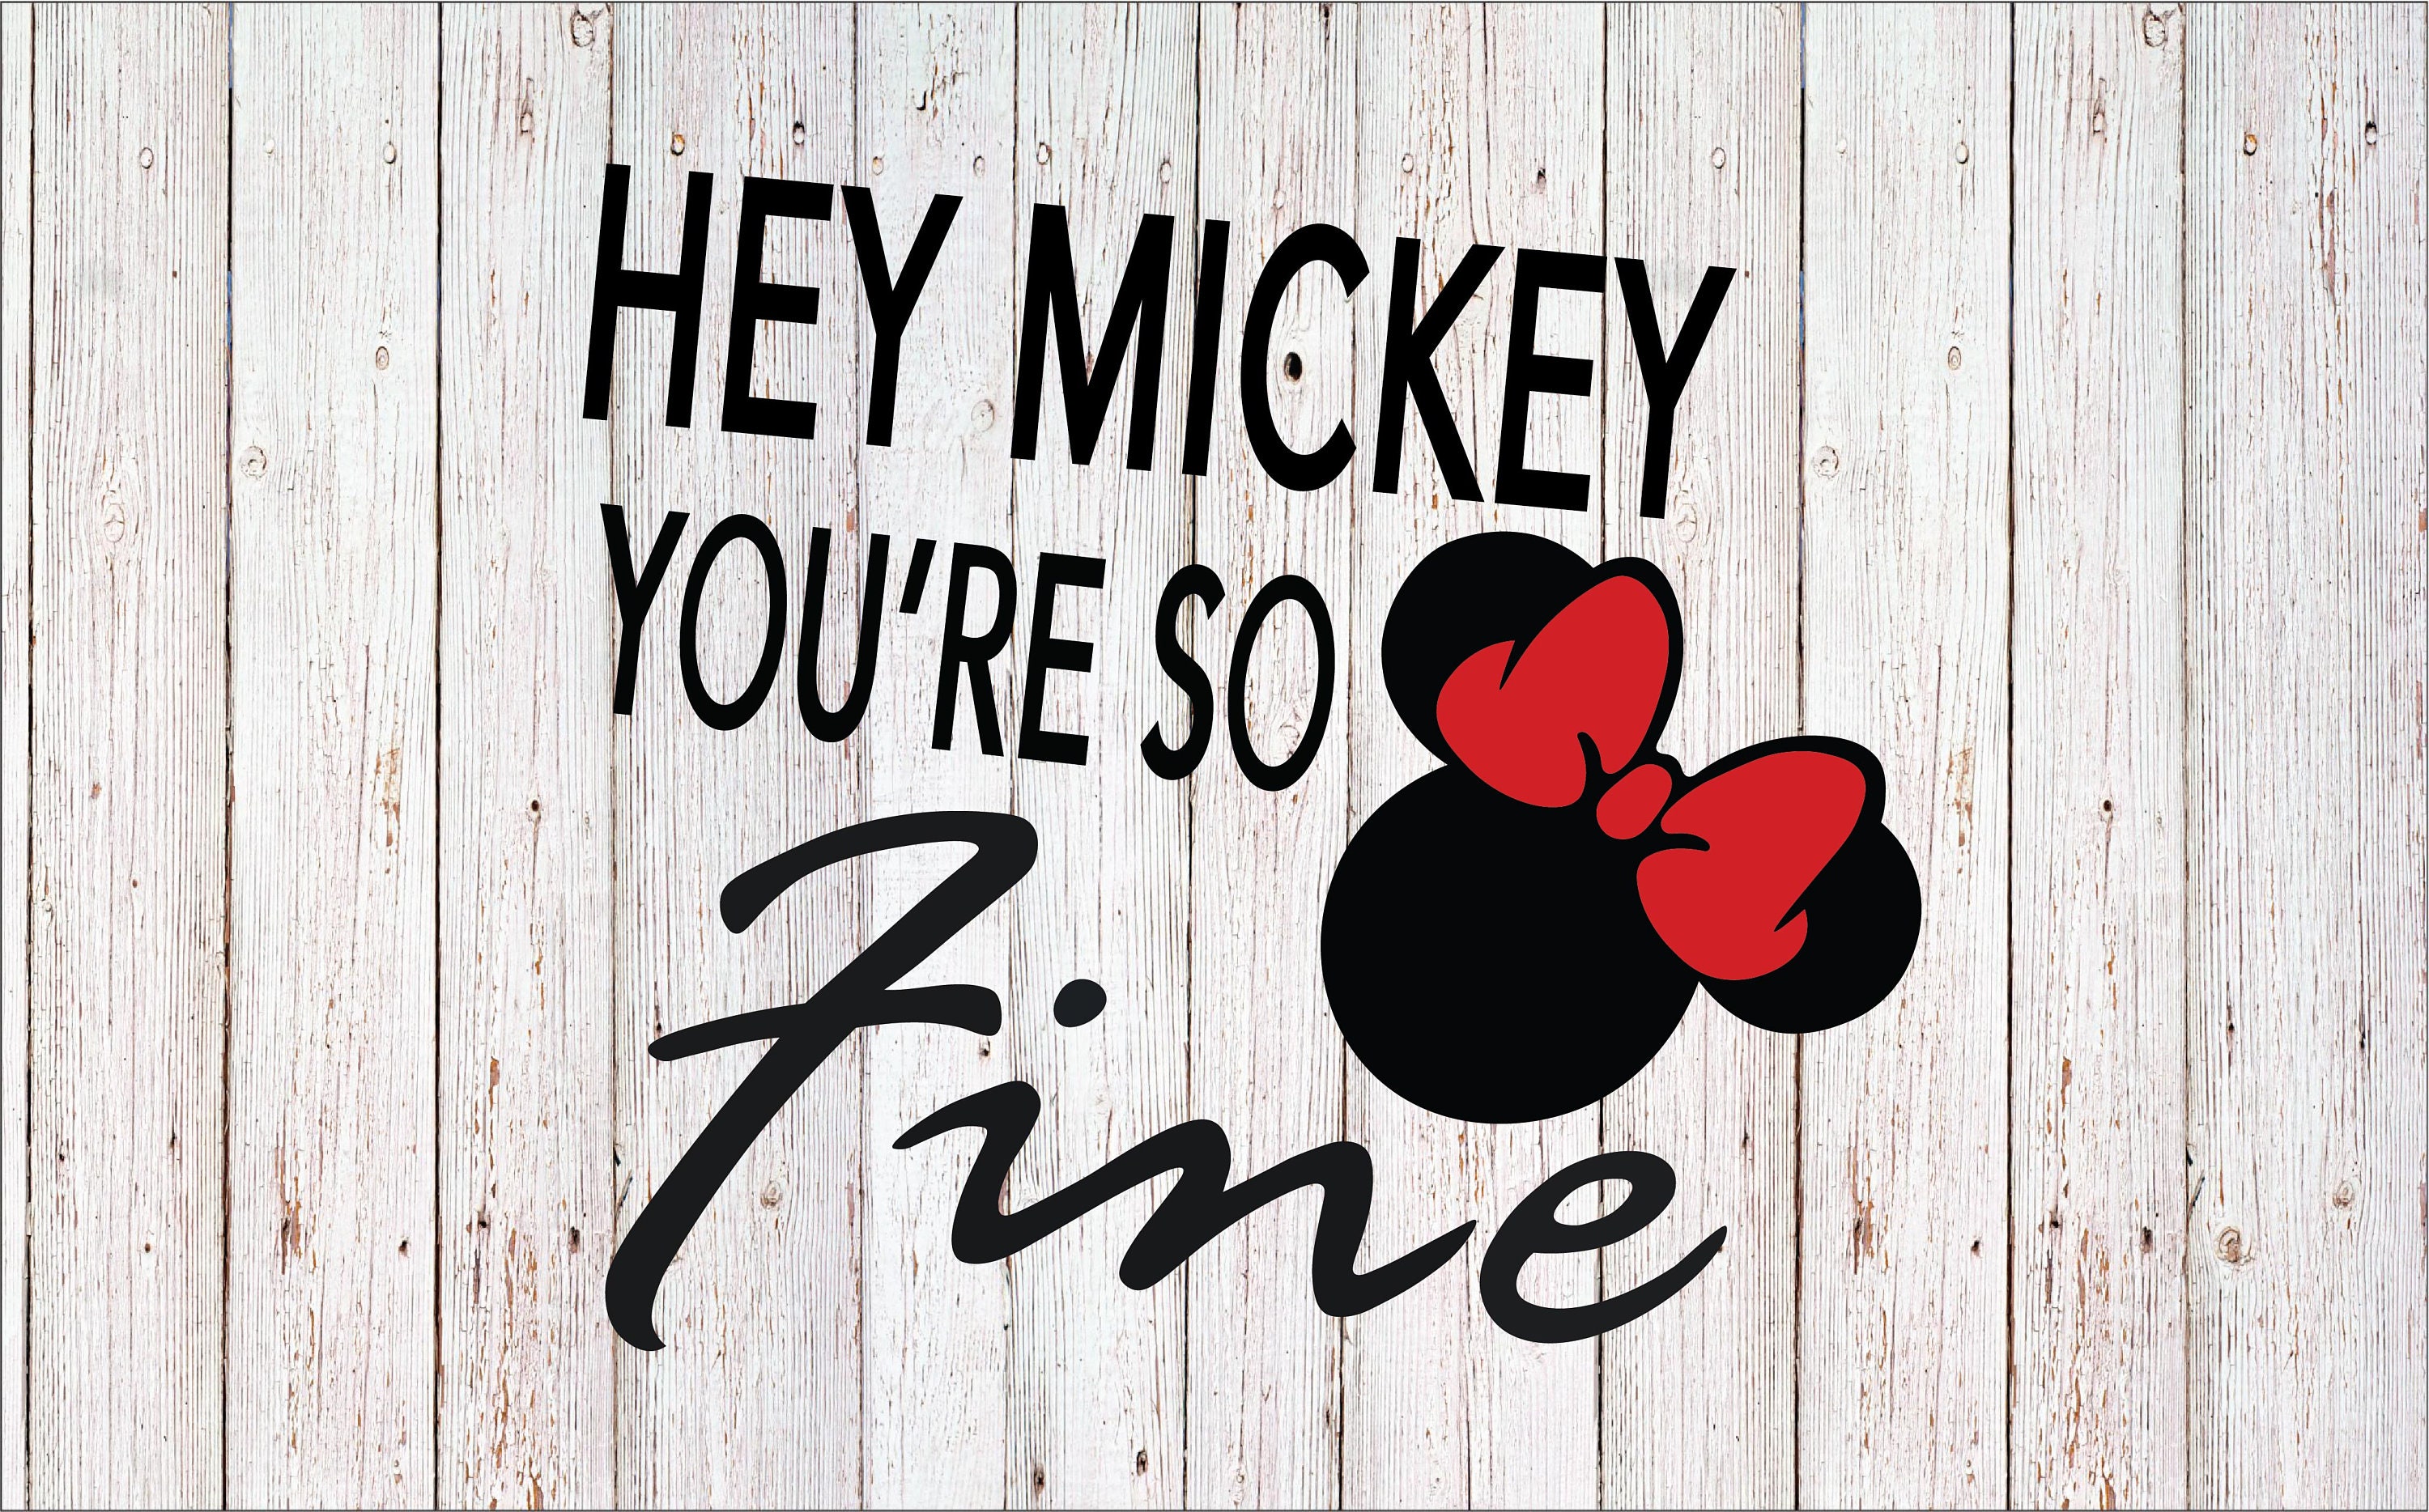 P.S.M. made for you Mickey Mouse. Посуда p.s.m. made for you Mickey Mouse. Hey mickey speed